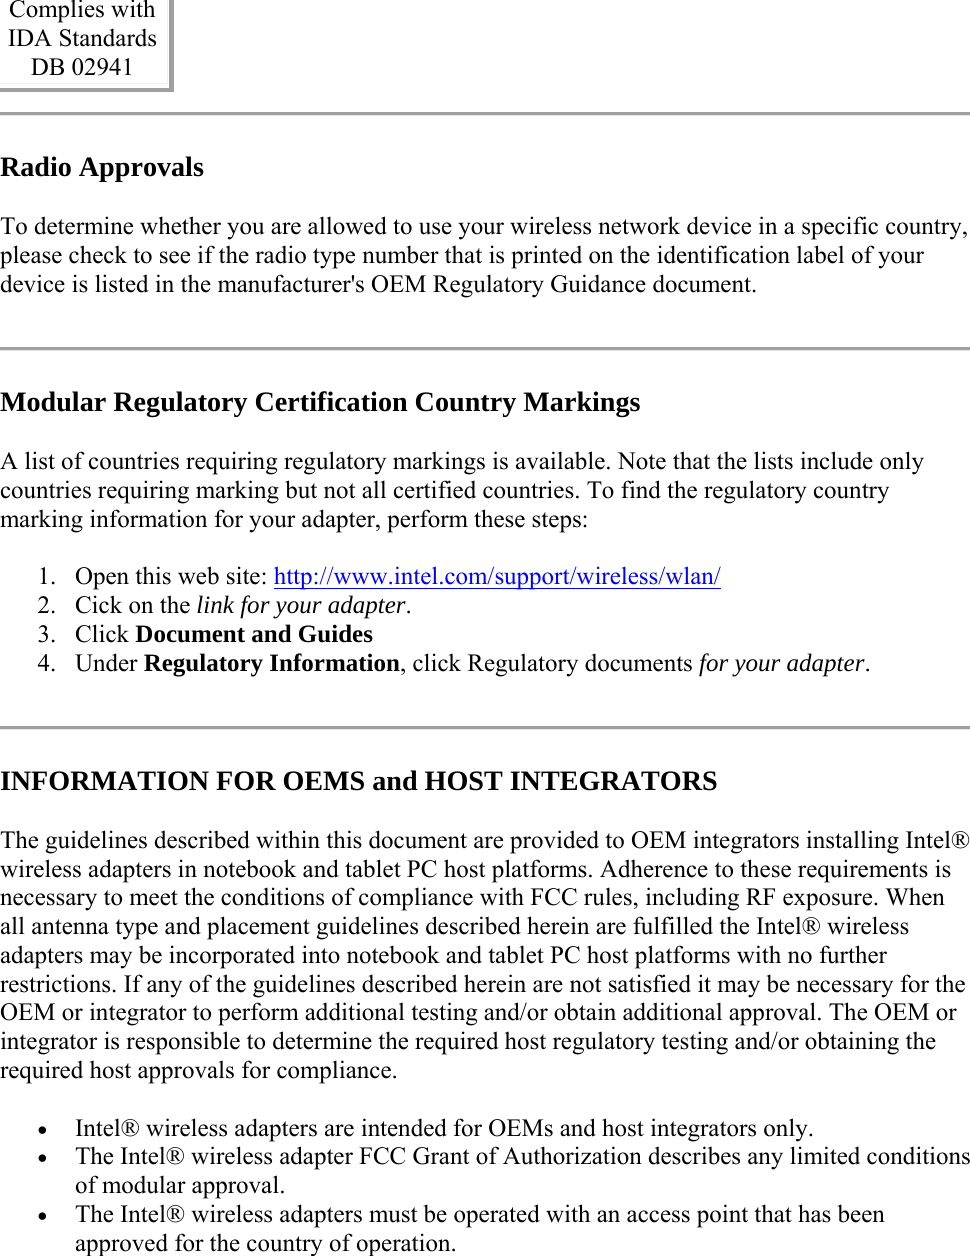 Complies with  IDA Standards  DB 02941  Radio Approvals To determine whether you are allowed to use your wireless network device in a specific country, please check to see if the radio type number that is printed on the identification label of your device is listed in the manufacturer&apos;s OEM Regulatory Guidance document.  Modular Regulatory Certification Country Markings A list of countries requiring regulatory markings is available. Note that the lists include only countries requiring marking but not all certified countries. To find the regulatory country marking information for your adapter, perform these steps: 1. Open this web site: http://www.intel.com/support/wireless/wlan/  2. Cick on the link for your adapter.  3. Click Document and Guides  4. Under Regulatory Information, click Regulatory documents for your adapter.   INFORMATION FOR OEMS and HOST INTEGRATORS The guidelines described within this document are provided to OEM integrators installing Intel® wireless adapters in notebook and tablet PC host platforms. Adherence to these requirements is necessary to meet the conditions of compliance with FCC rules, including RF exposure. When all antenna type and placement guidelines described herein are fulfilled the Intel® wireless adapters may be incorporated into notebook and tablet PC host platforms with no further restrictions. If any of the guidelines described herein are not satisfied it may be necessary for the OEM or integrator to perform additional testing and/or obtain additional approval. The OEM or integrator is responsible to determine the required host regulatory testing and/or obtaining the required host approvals for compliance.   Intel® wireless adapters are intended for OEMs and host integrators only.   The Intel® wireless adapter FCC Grant of Authorization describes any limited conditions of modular approval.   The Intel® wireless adapters must be operated with an access point that has been approved for the country of operation. 